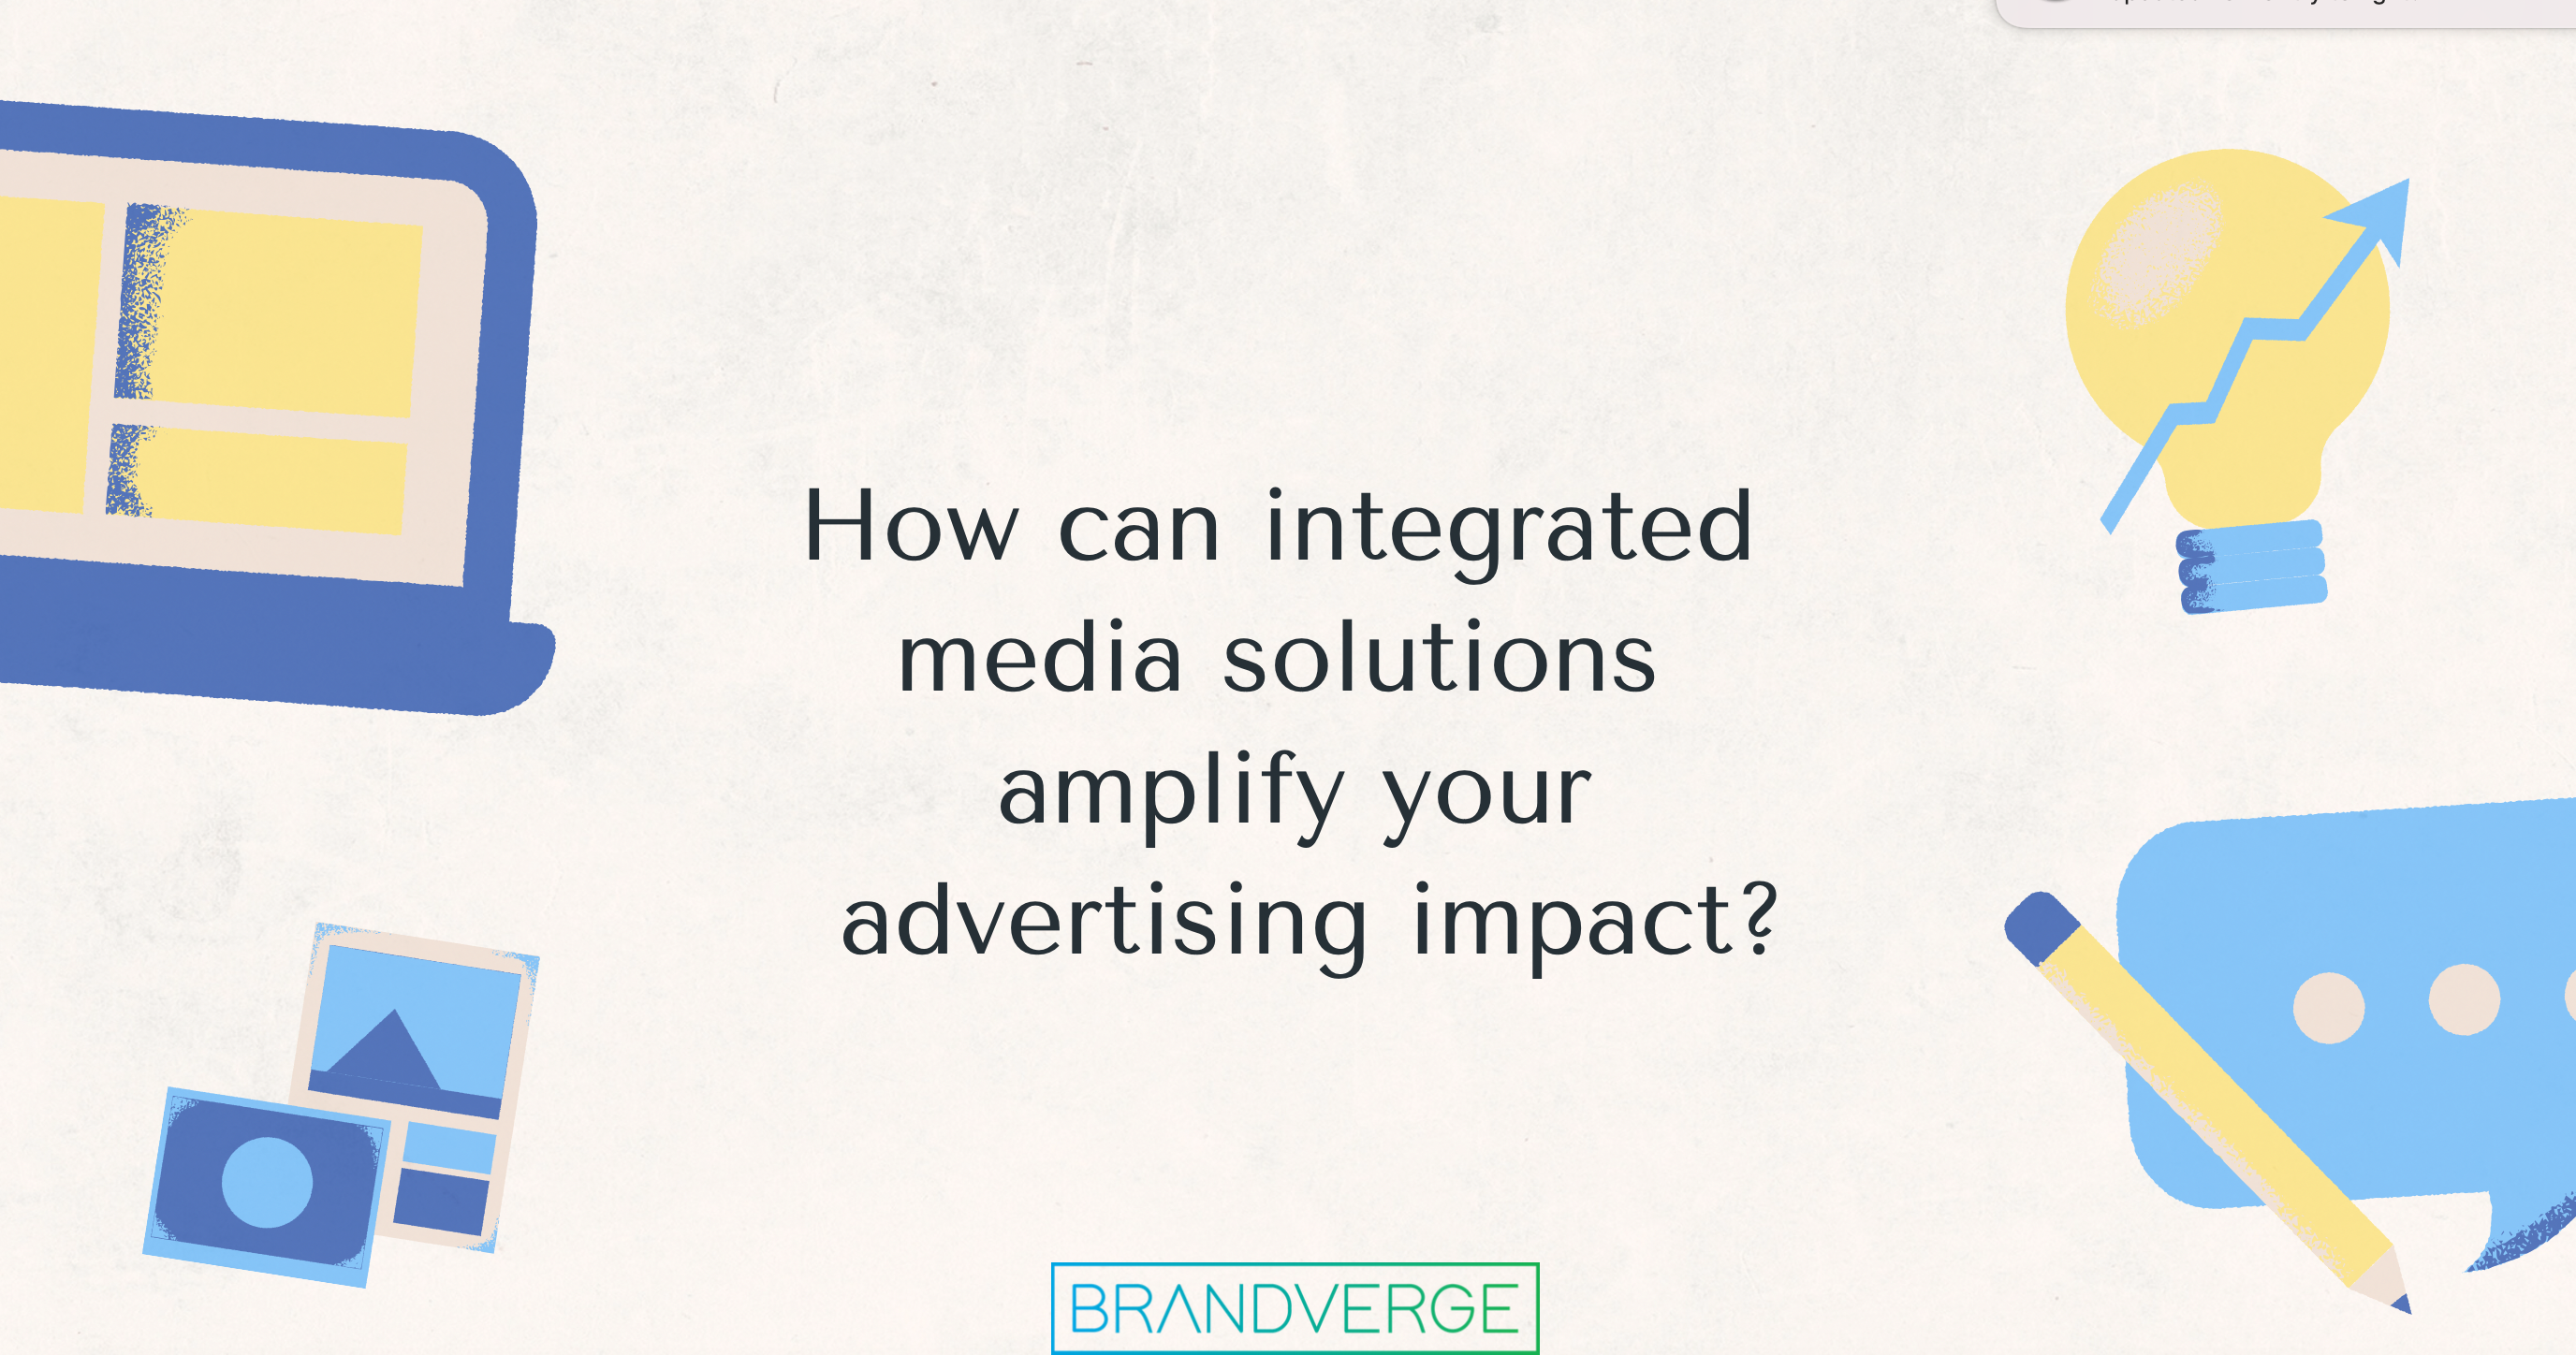 How Can Integrated Media Solutions Amplify Your Advertising Impact?